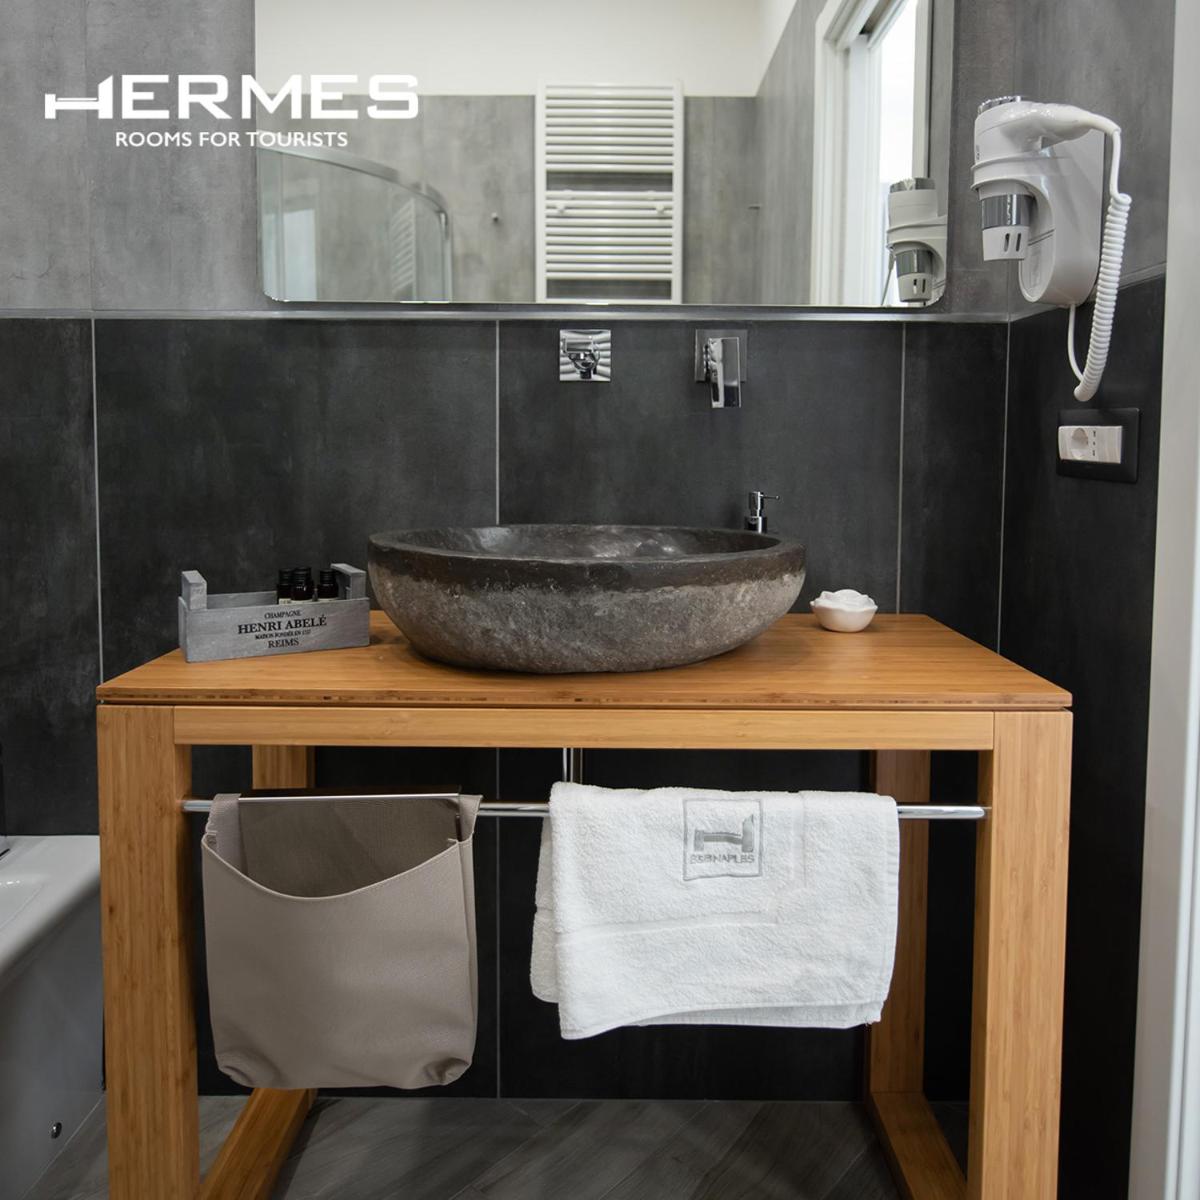 Foto - Hermes rooms for tourists